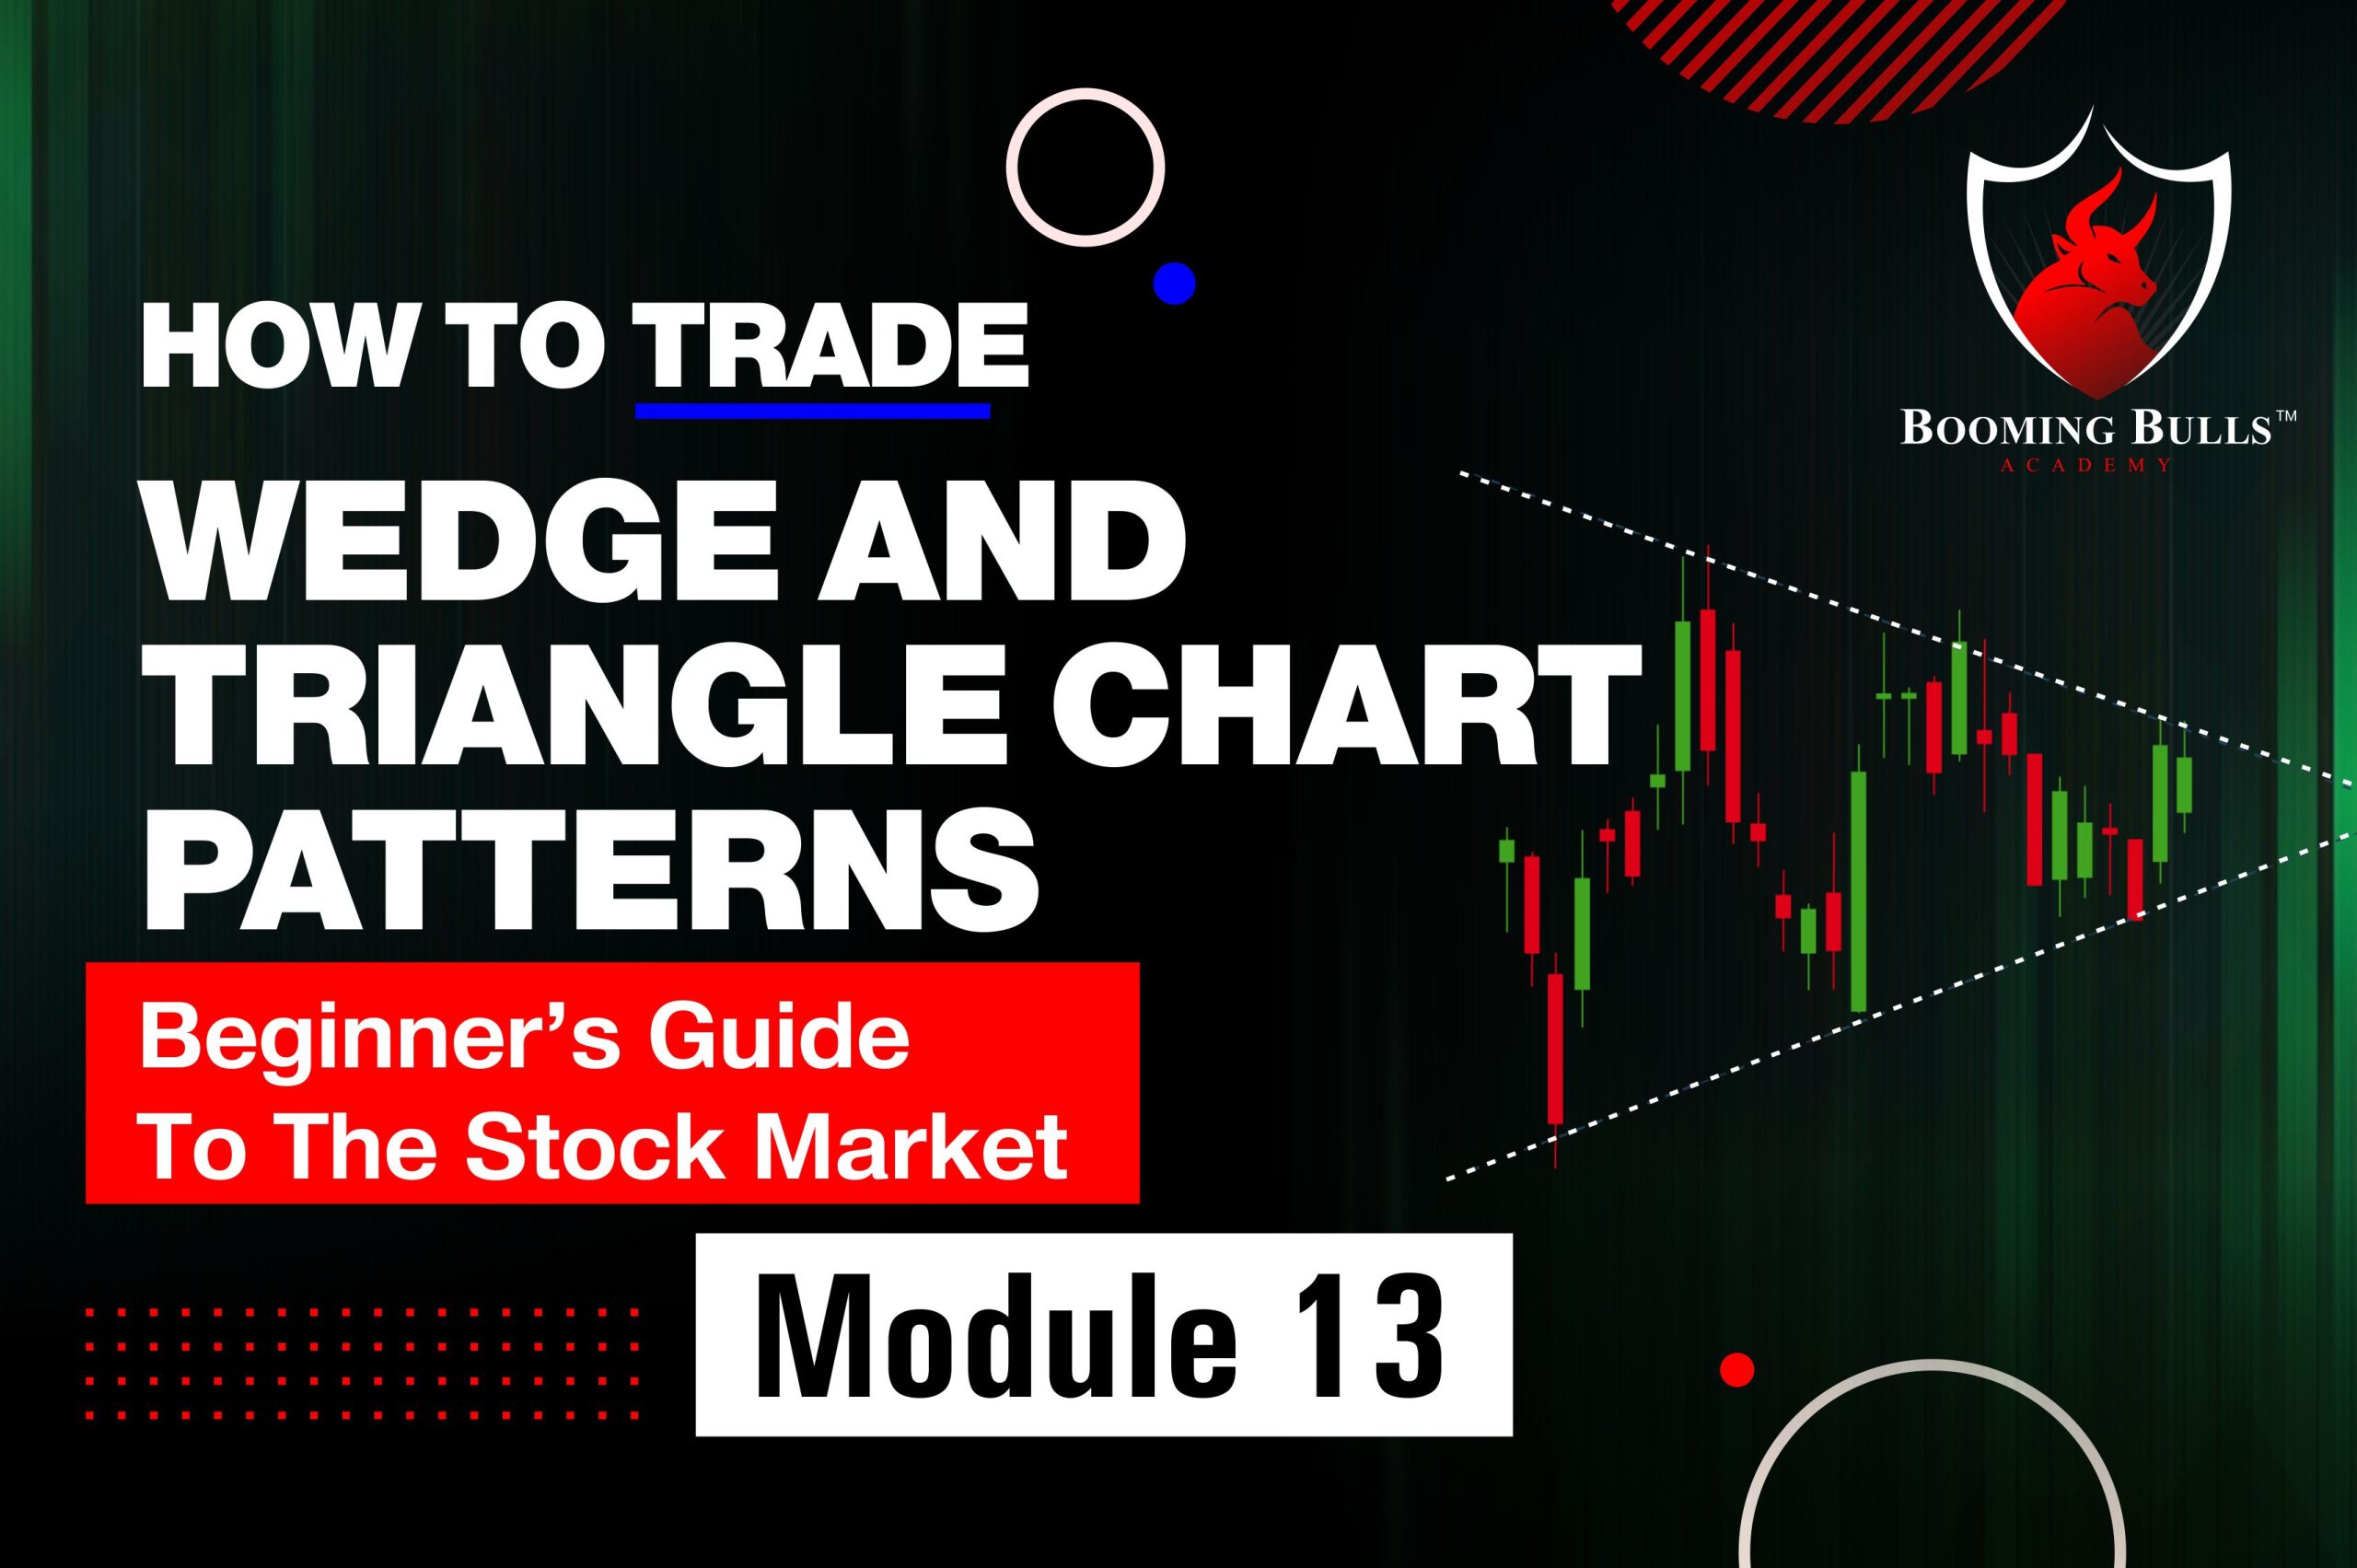 How To Trade Wedge And Triangle Chart Patterns | Beginner’s Guide To The Stock Market | Module 13